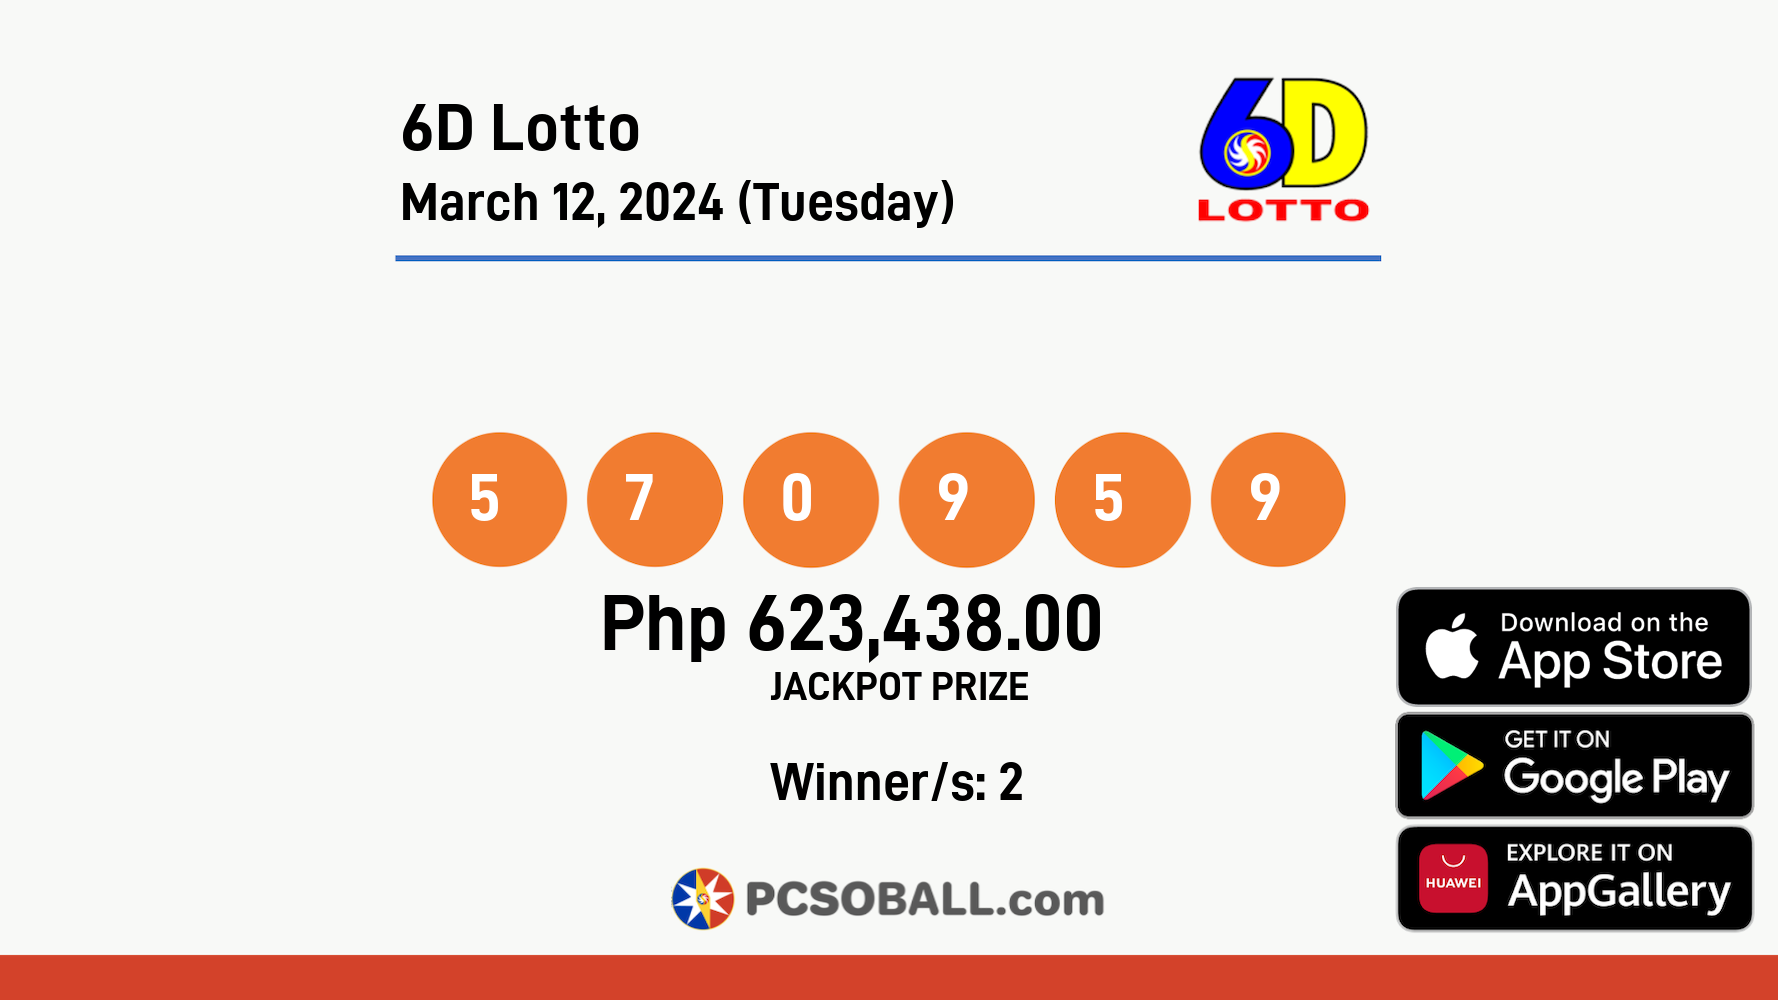 6D Lotto March 12, 2024 (Tuesday) Result